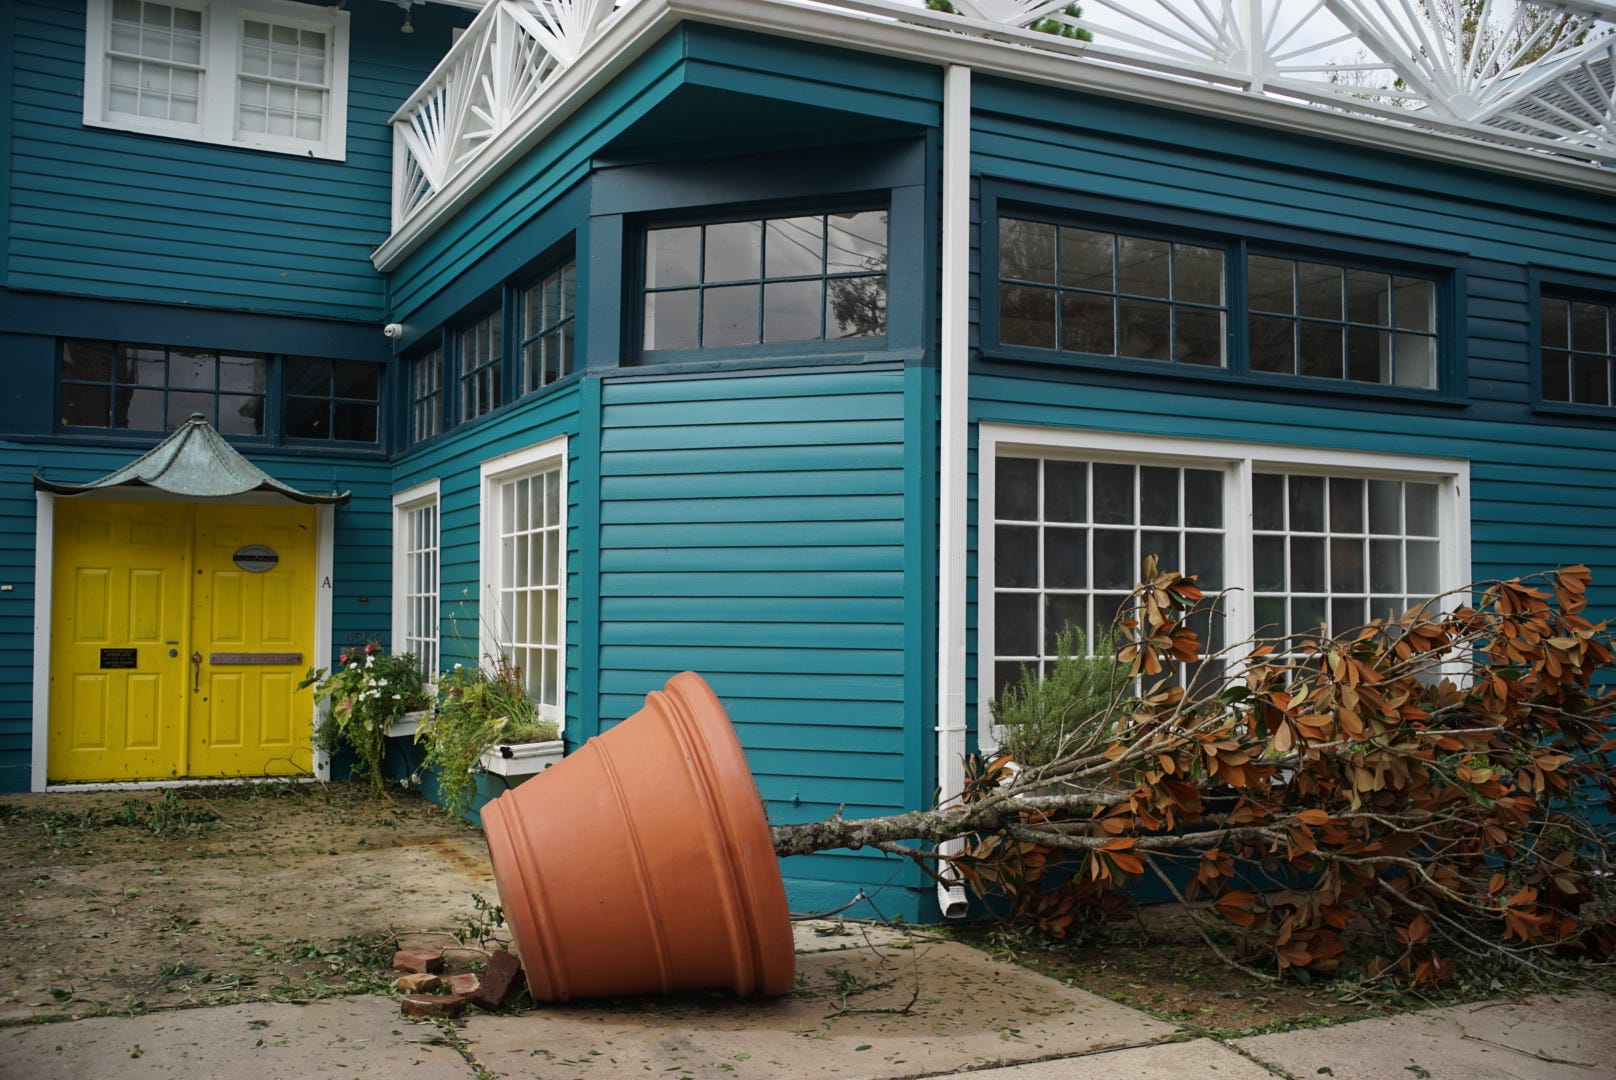 A large planter is seen on its side in front of a house